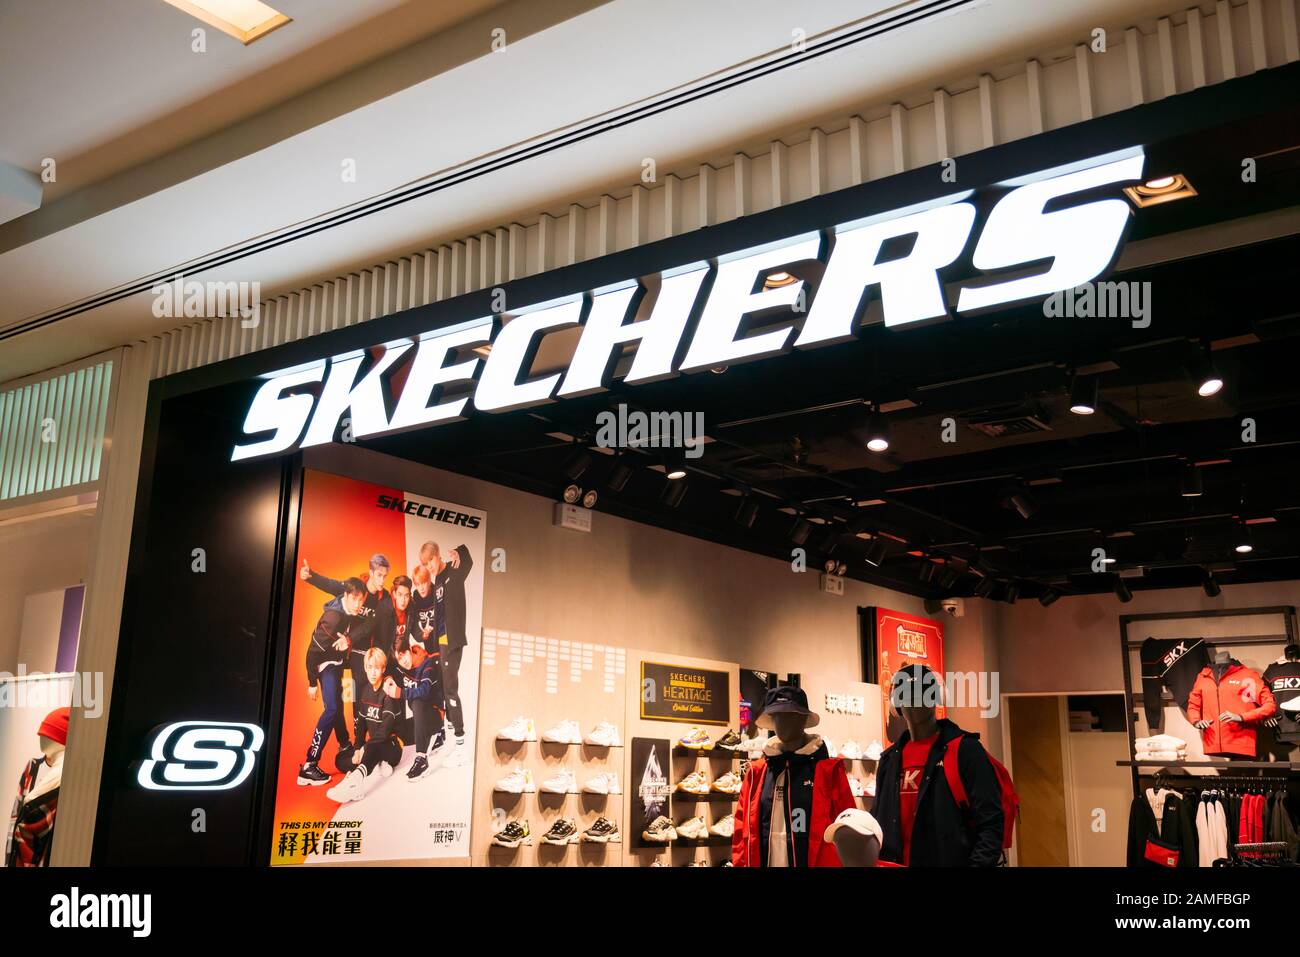 who owns skechers